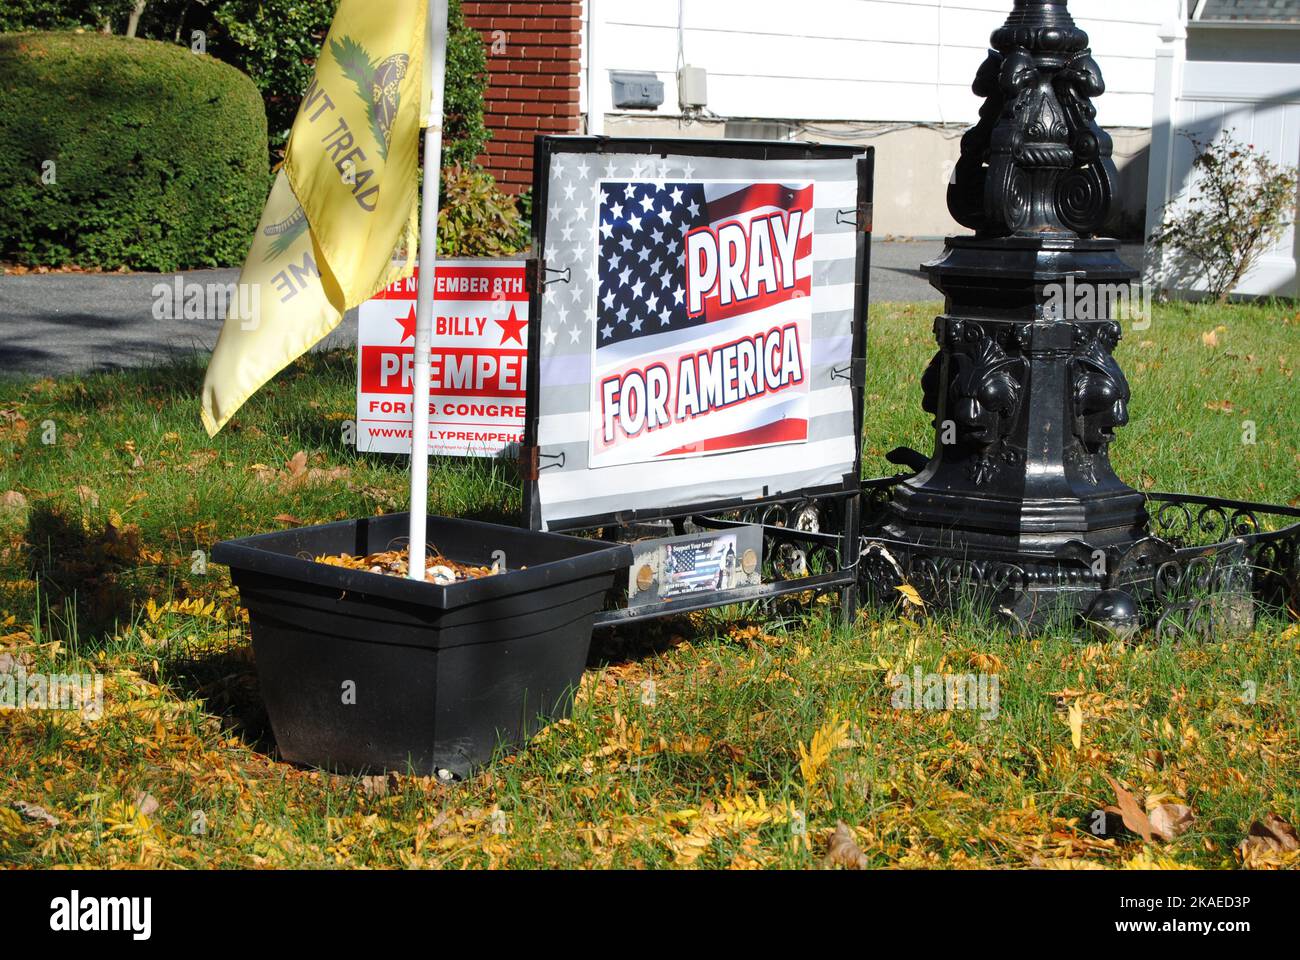 Rutherford, New Jersey, USA - October 29 2022: 'Pray For America” sign, the Gadsden “Don't Tread On Me' flag, and a sign for Republican Billy Prempeh. Stock Photo